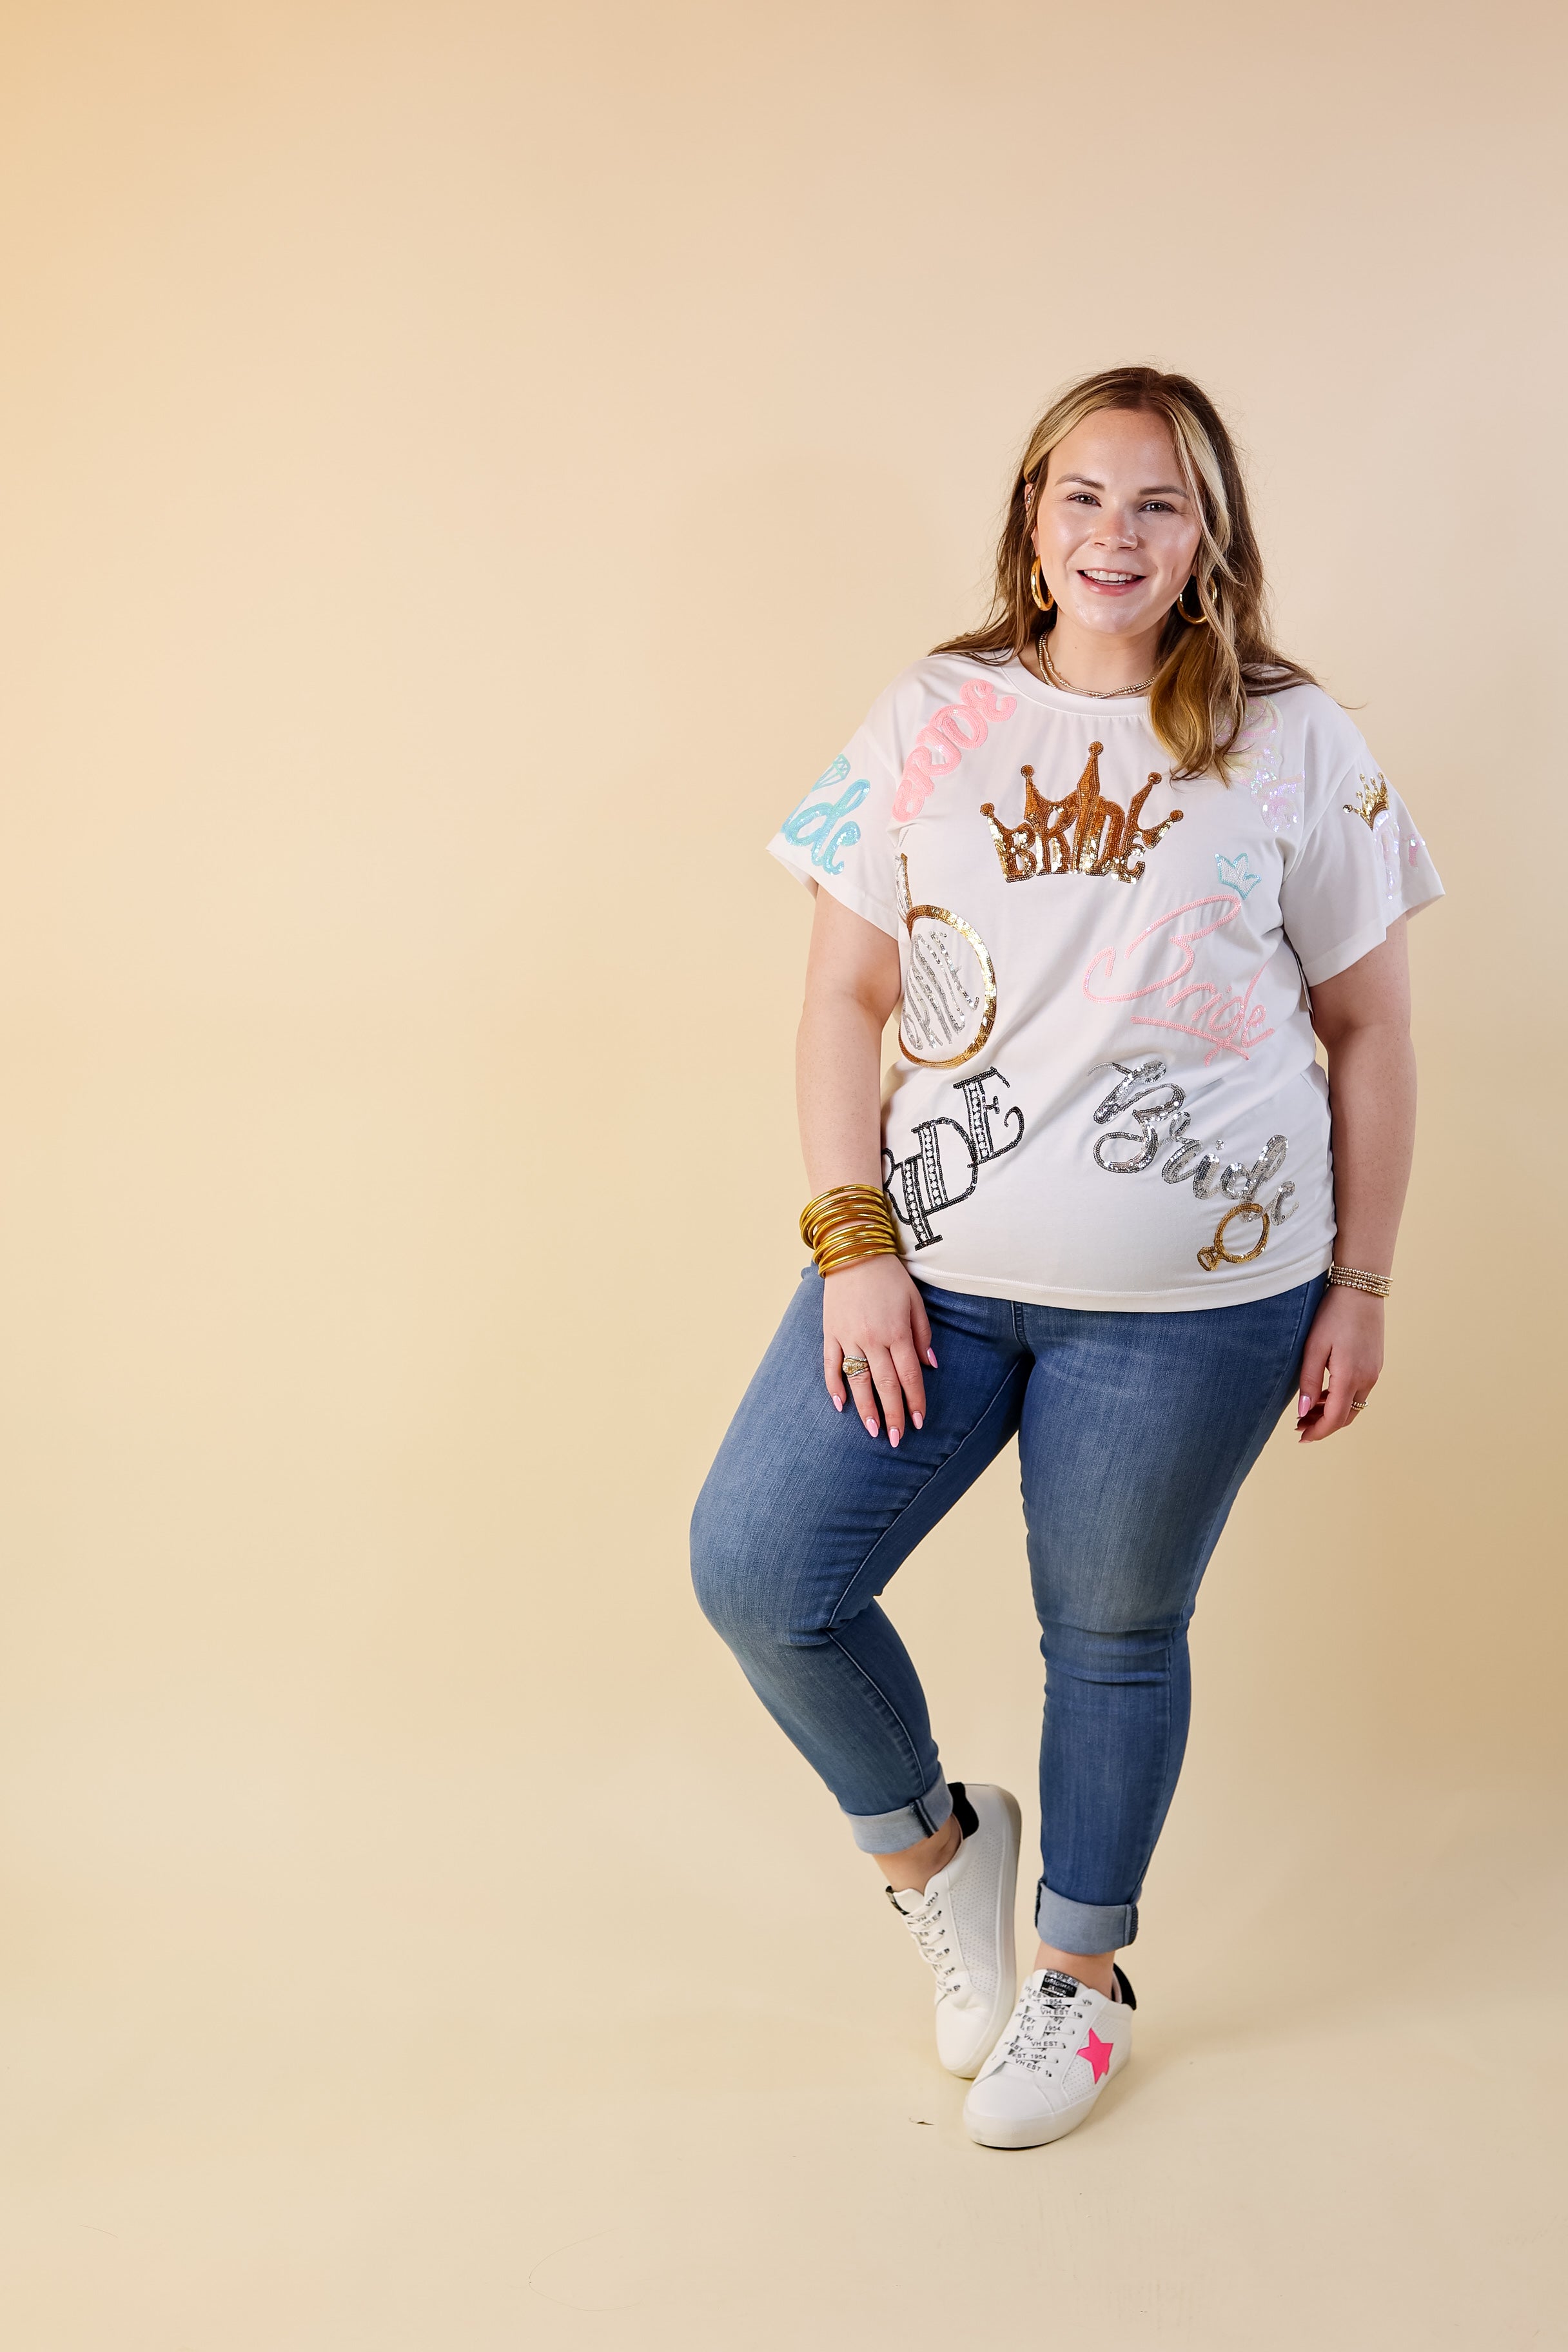 Queen Of Sparkles | Happily Ever After Bride Fully Sequin Short Sleeve Tee in White - Giddy Up Glamour Boutique